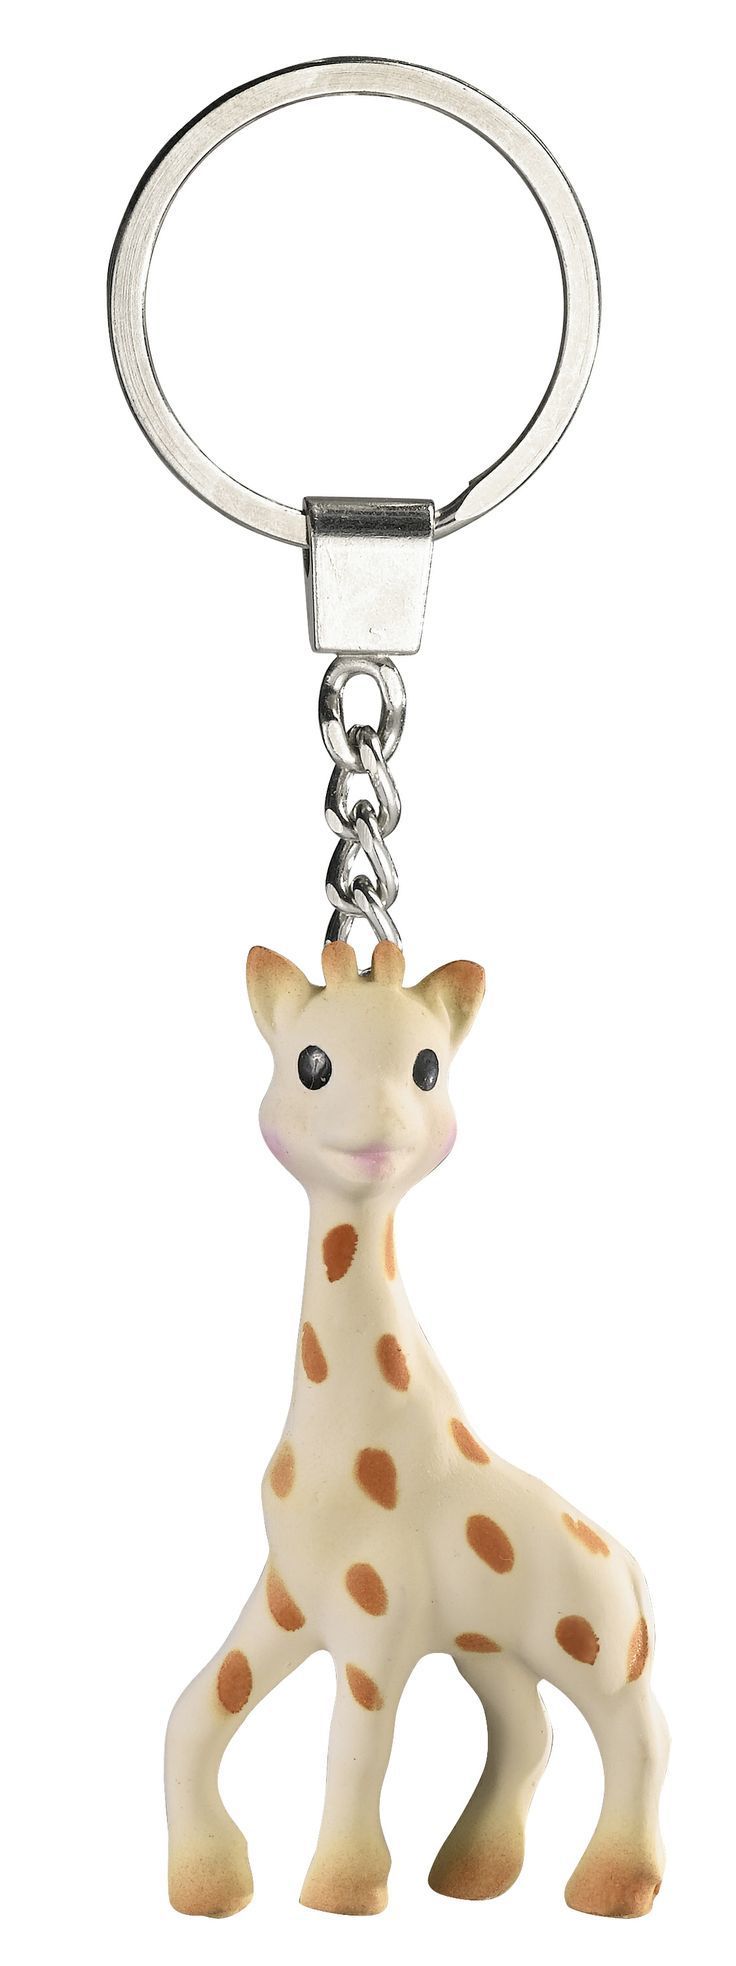 Sophie the giraffe Natural rubber toy